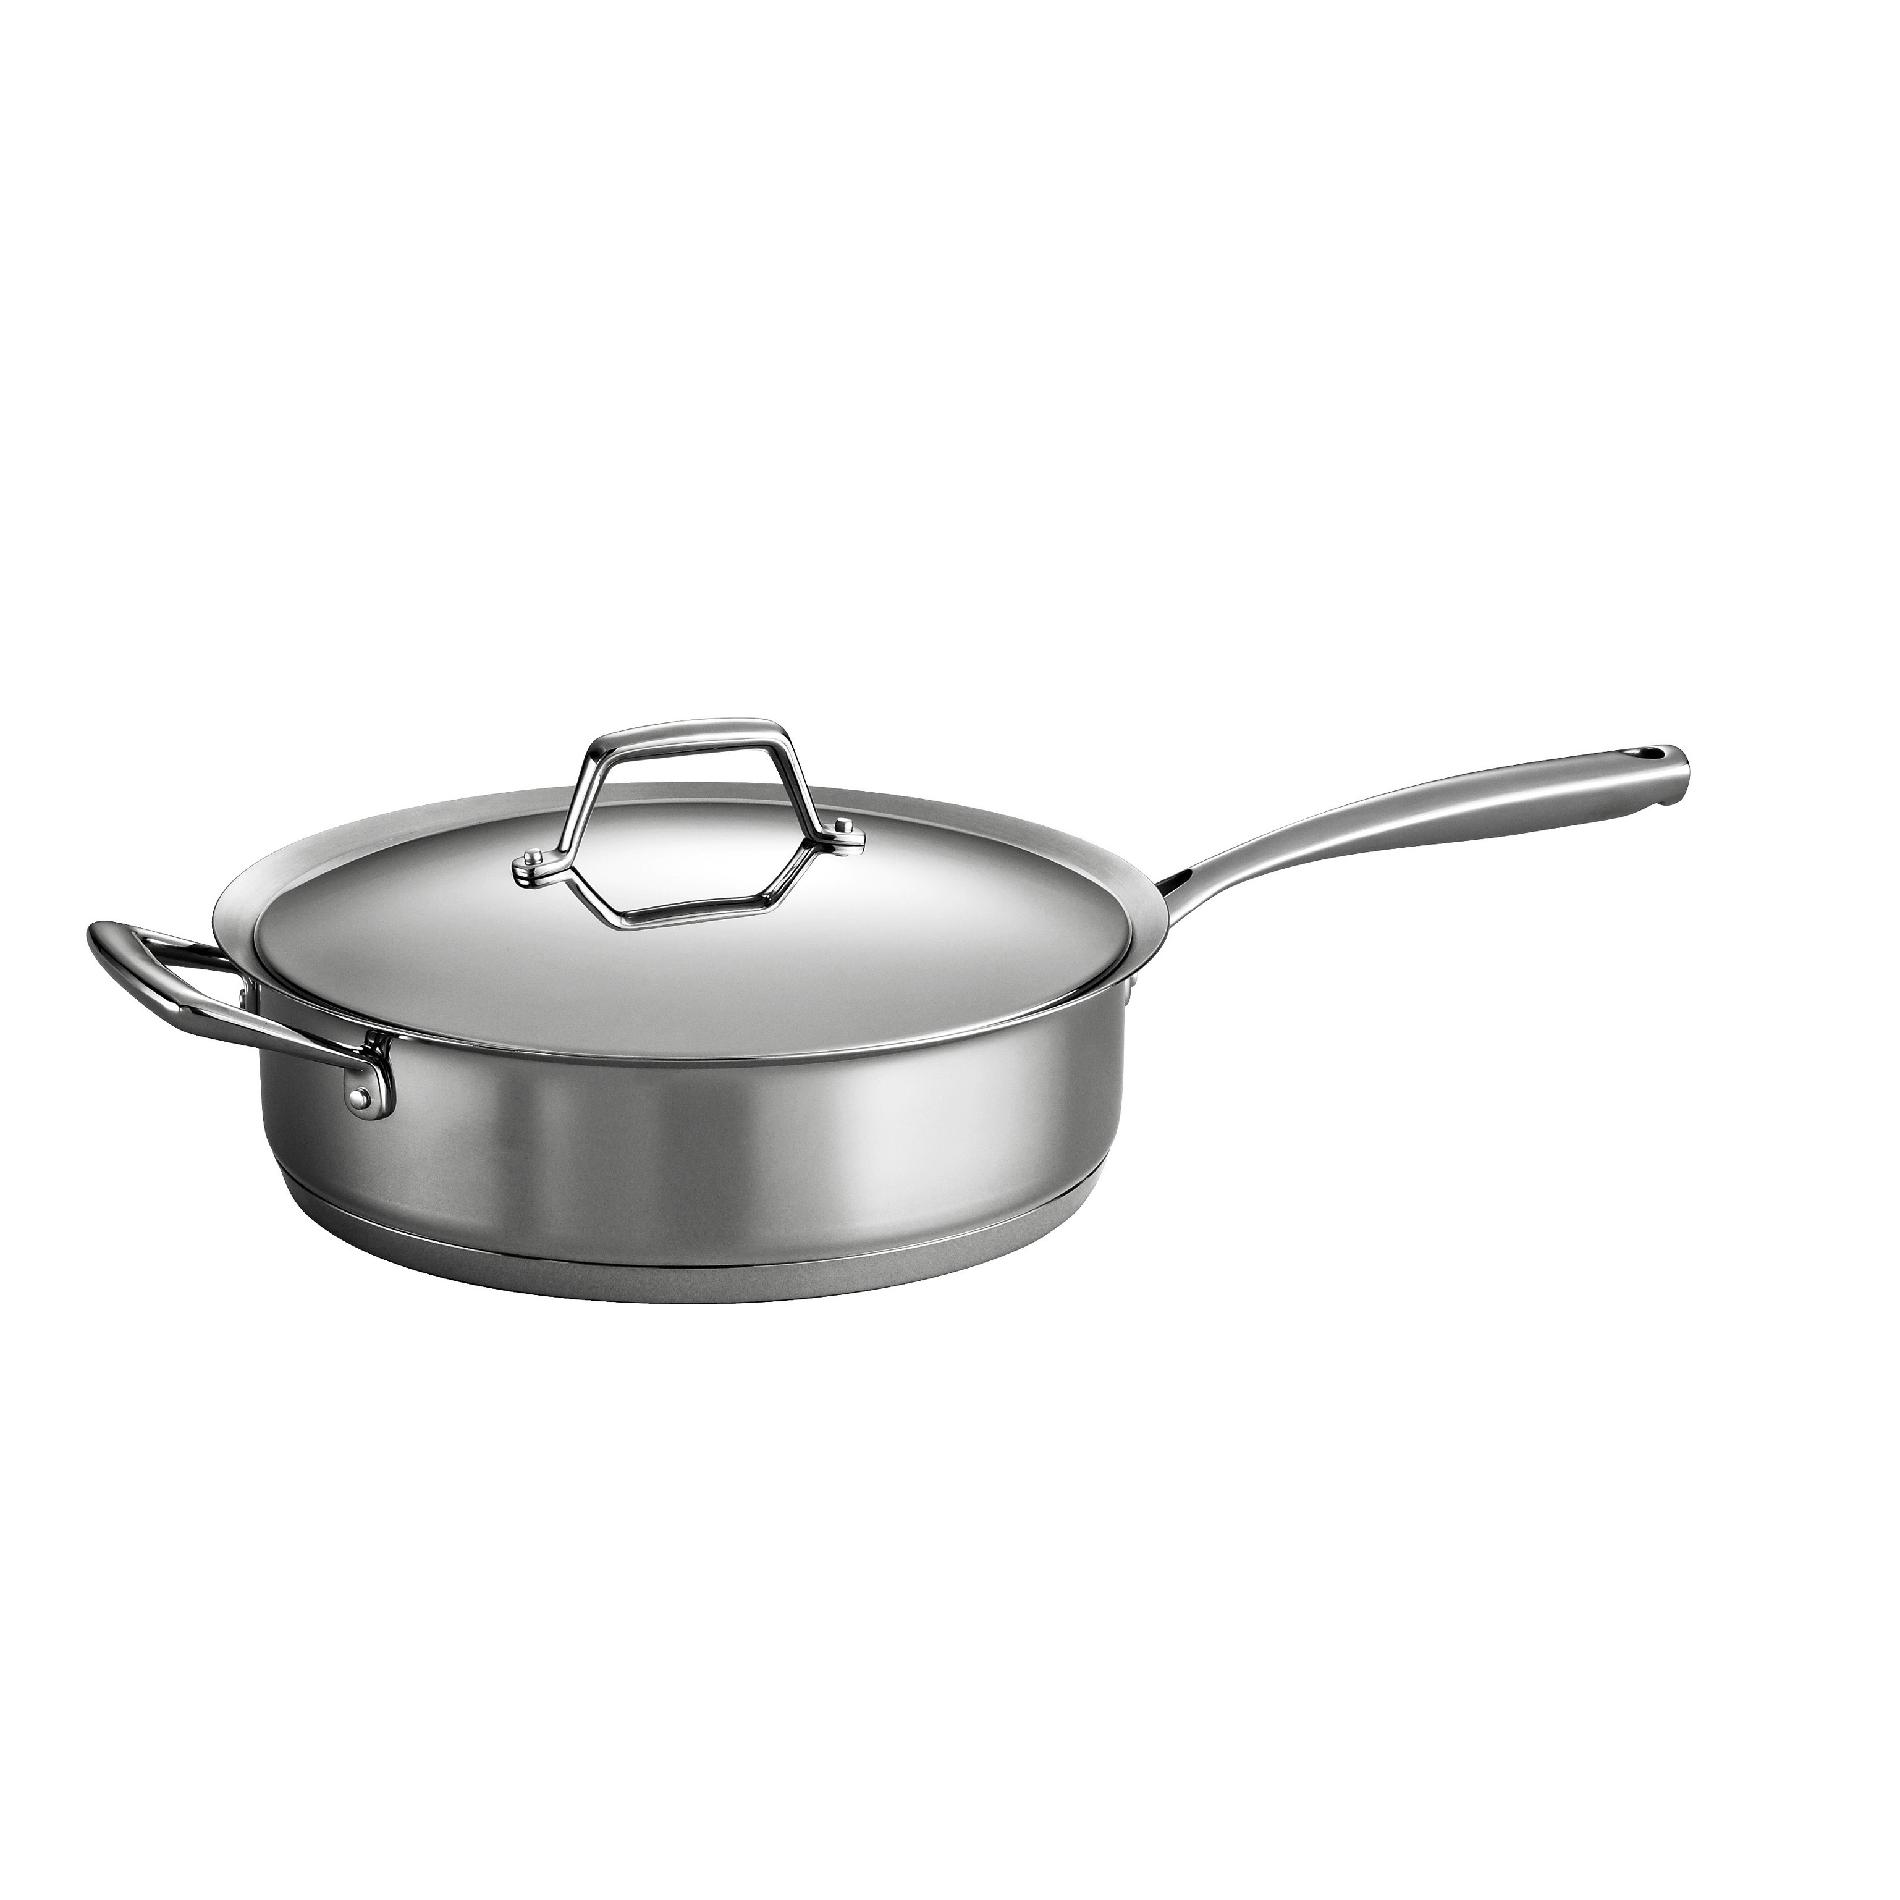 Gourmet Prima 18/10 Stainless Steel 5 Qt Covered Deep Saute Pan